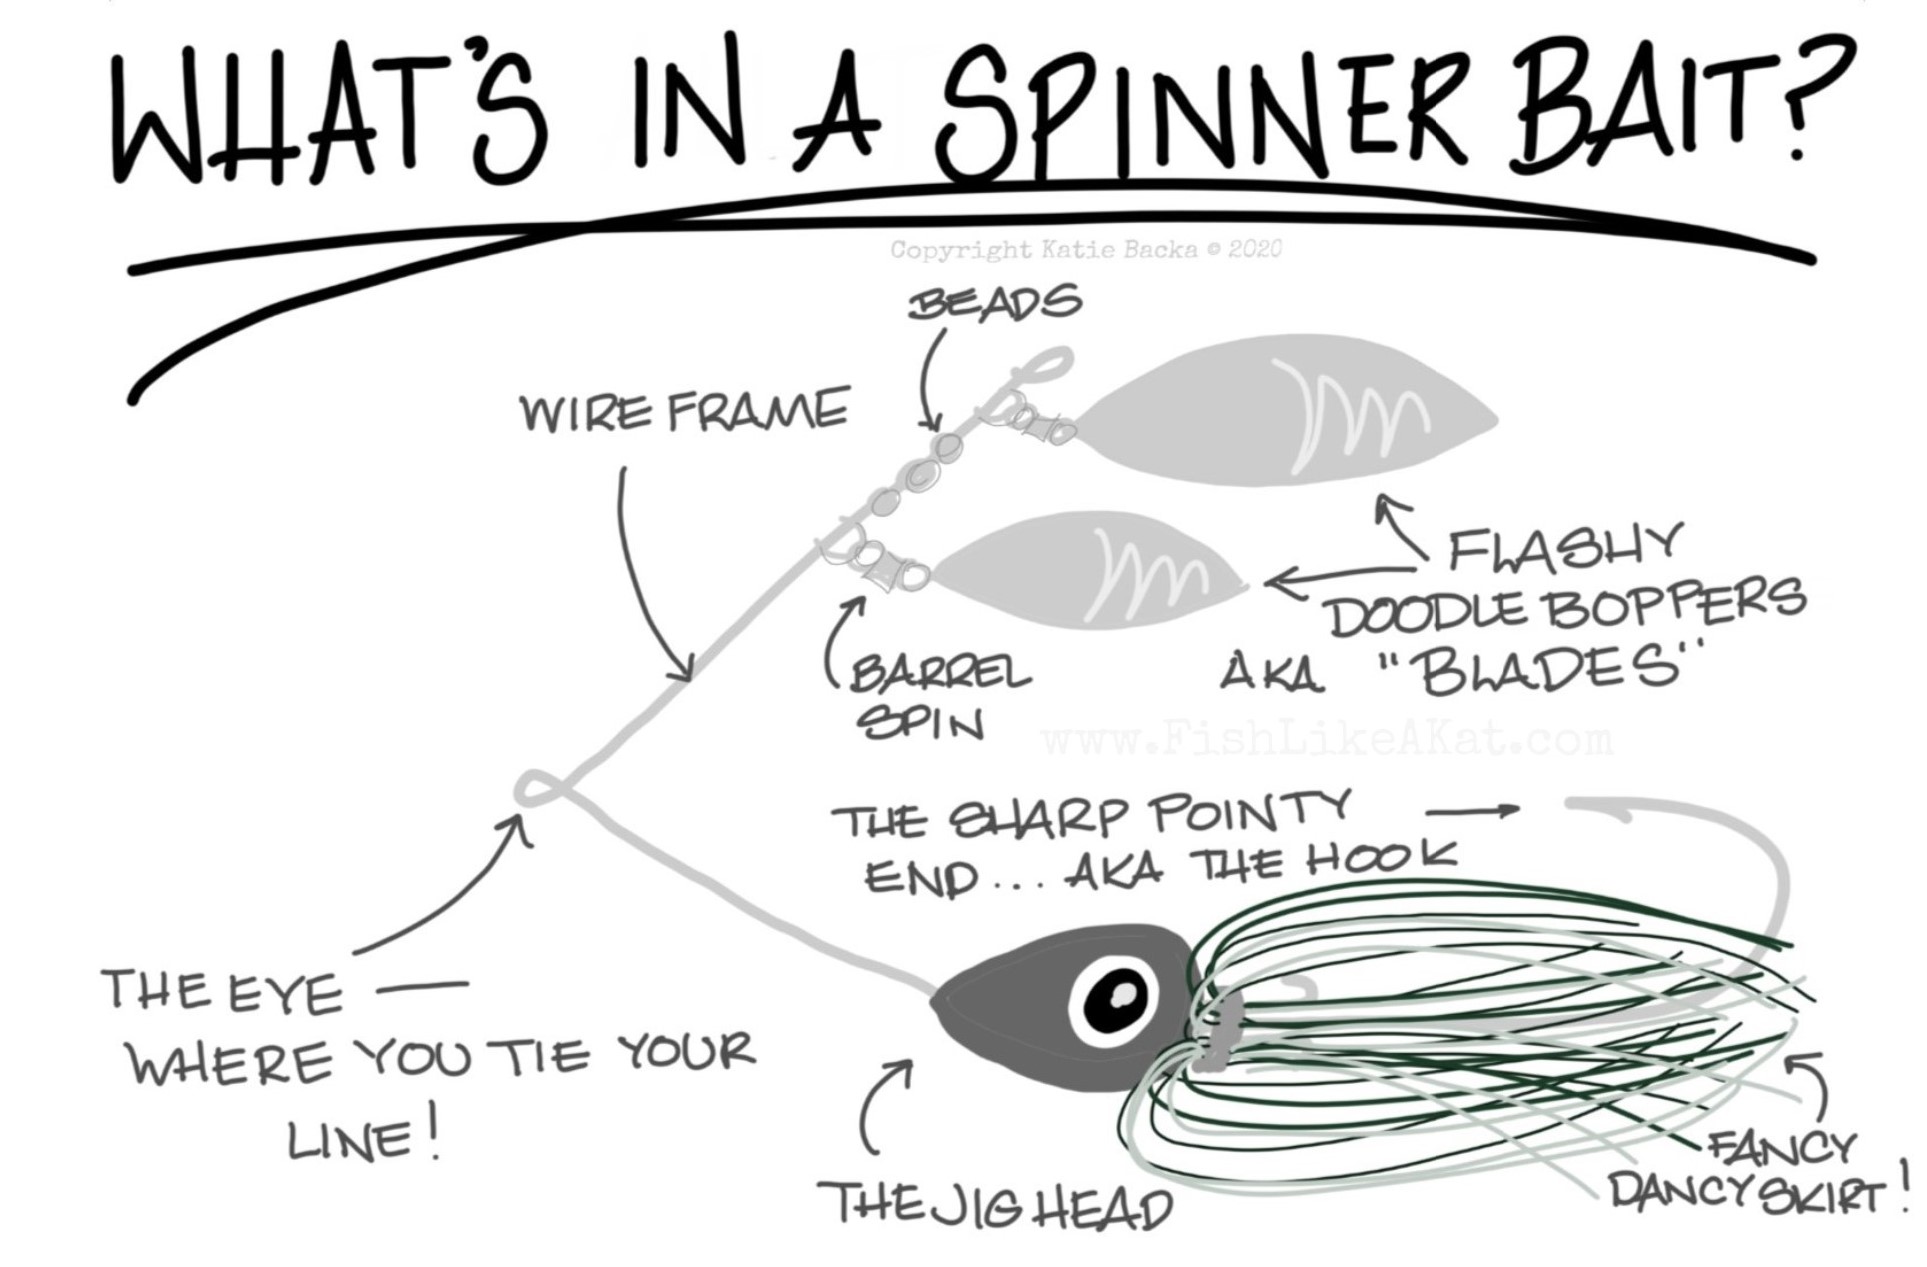 text: What's in a spinnerbait? Illustration of a spinnerbait with all of the components labeled